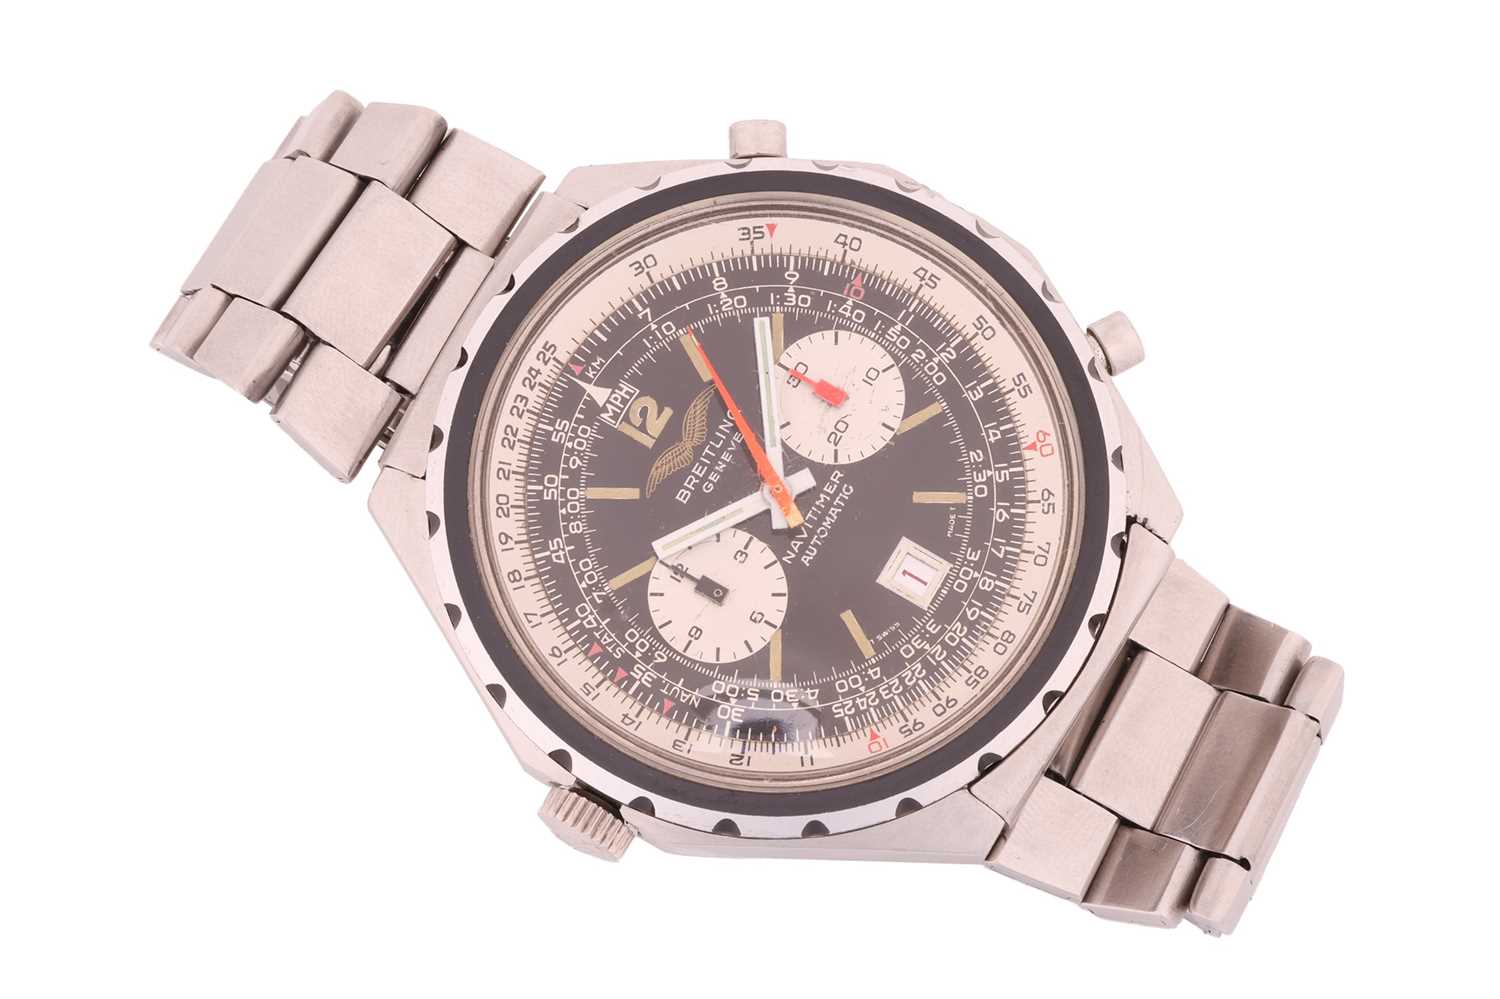 An (IAF) Iraqi Airforce issued Breitling Navitimer automatic reference: 1806 gentleman's wristwatch  - Image 3 of 6